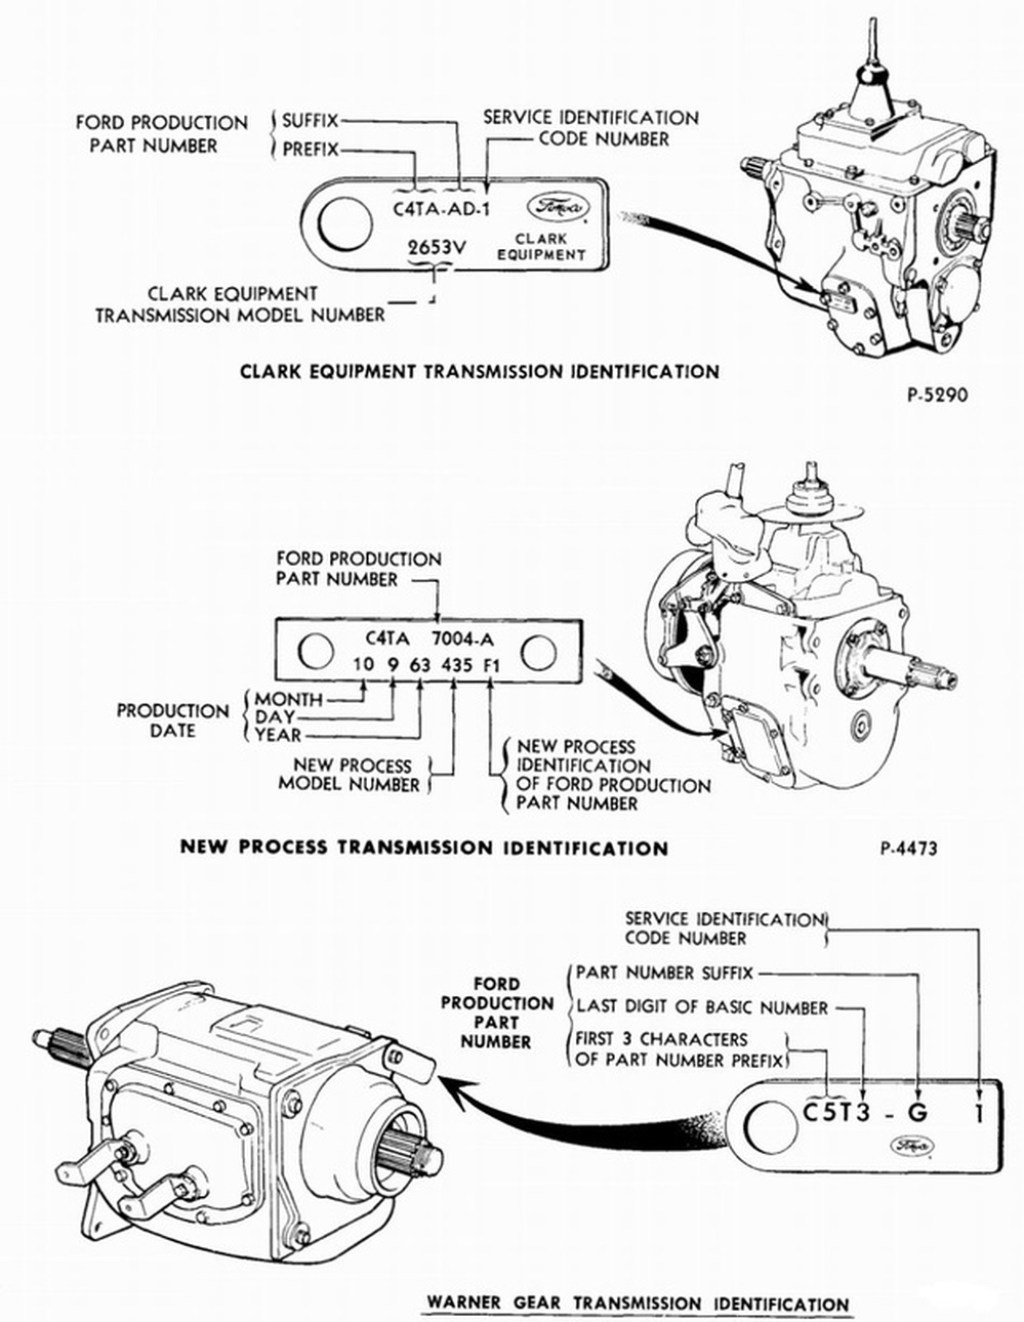 Picture of: Manual Transmission Applications